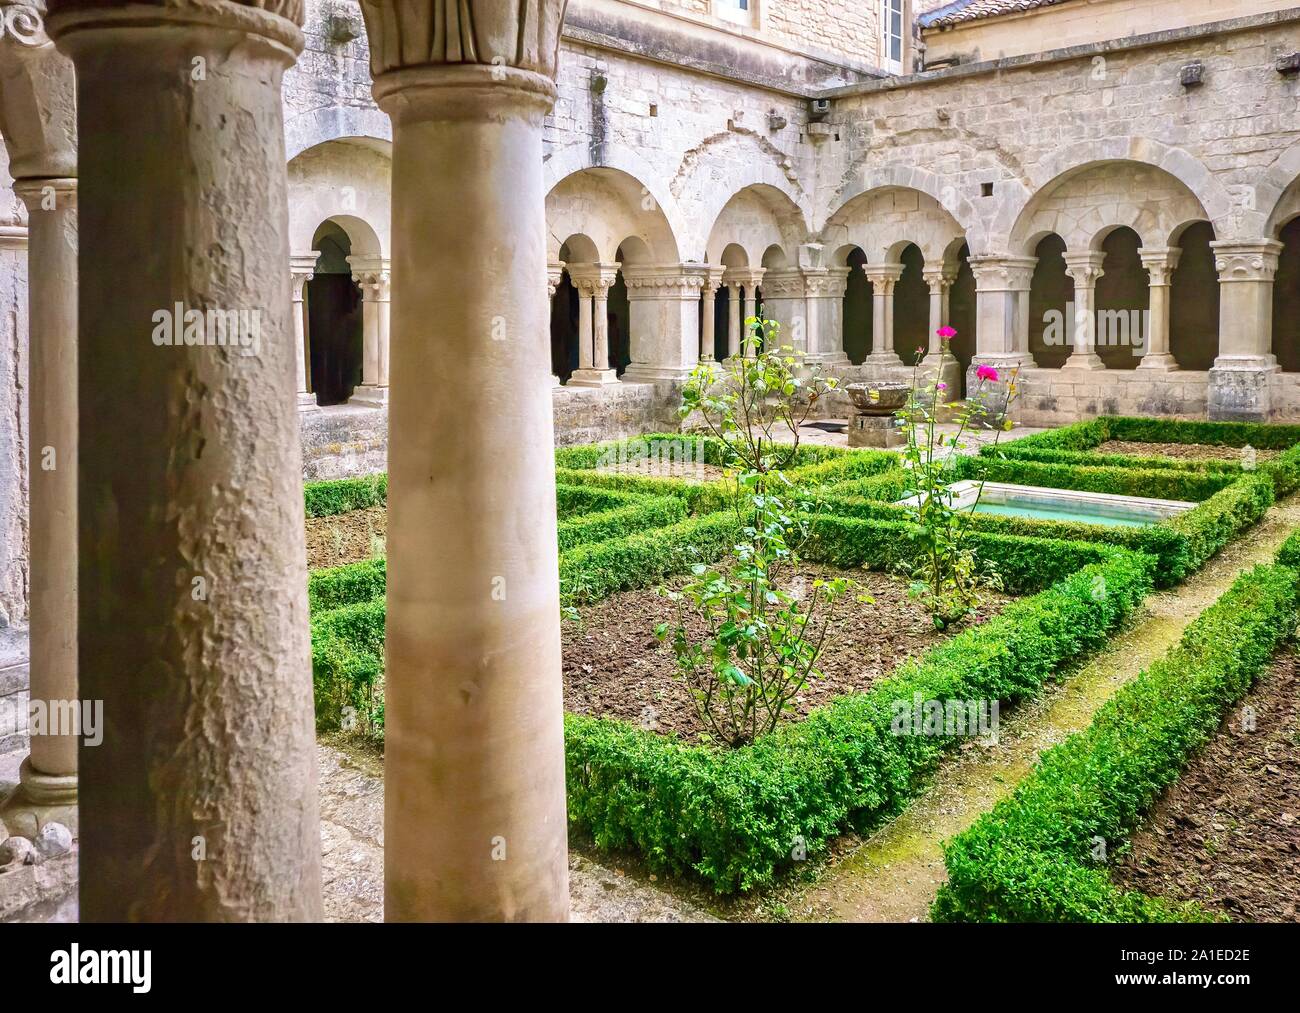 The central courtyard garden of the 12th century Senanque Abbey, with its Romanesque architecture and manicured gardens. Located in Gordes, France. Stock Photo